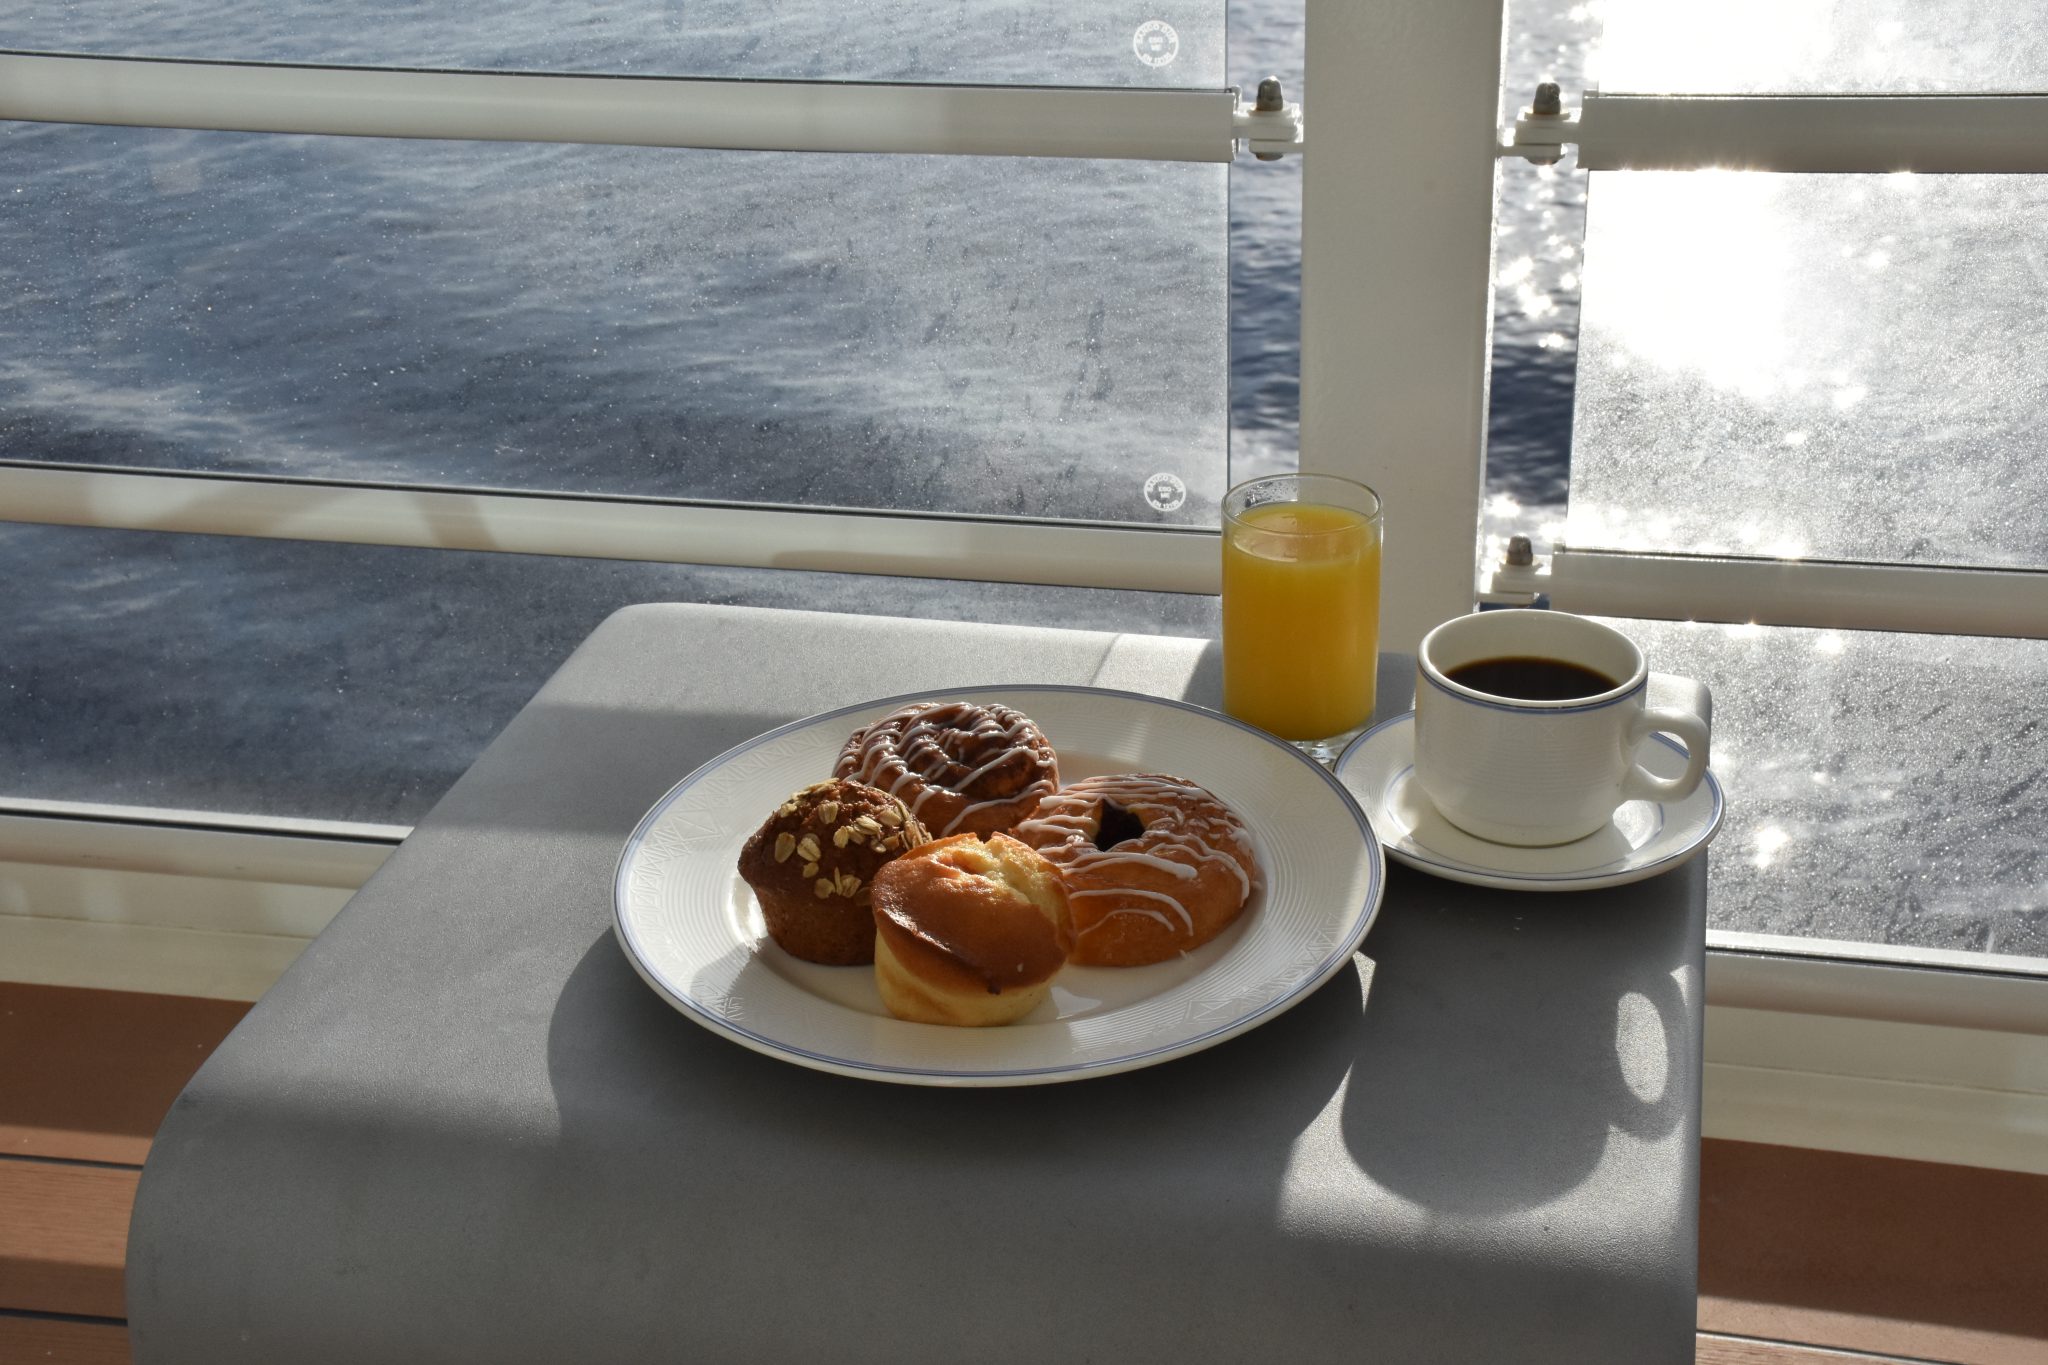 Breakfast pastries, orange juice, and coffee on a cruise ship balcony